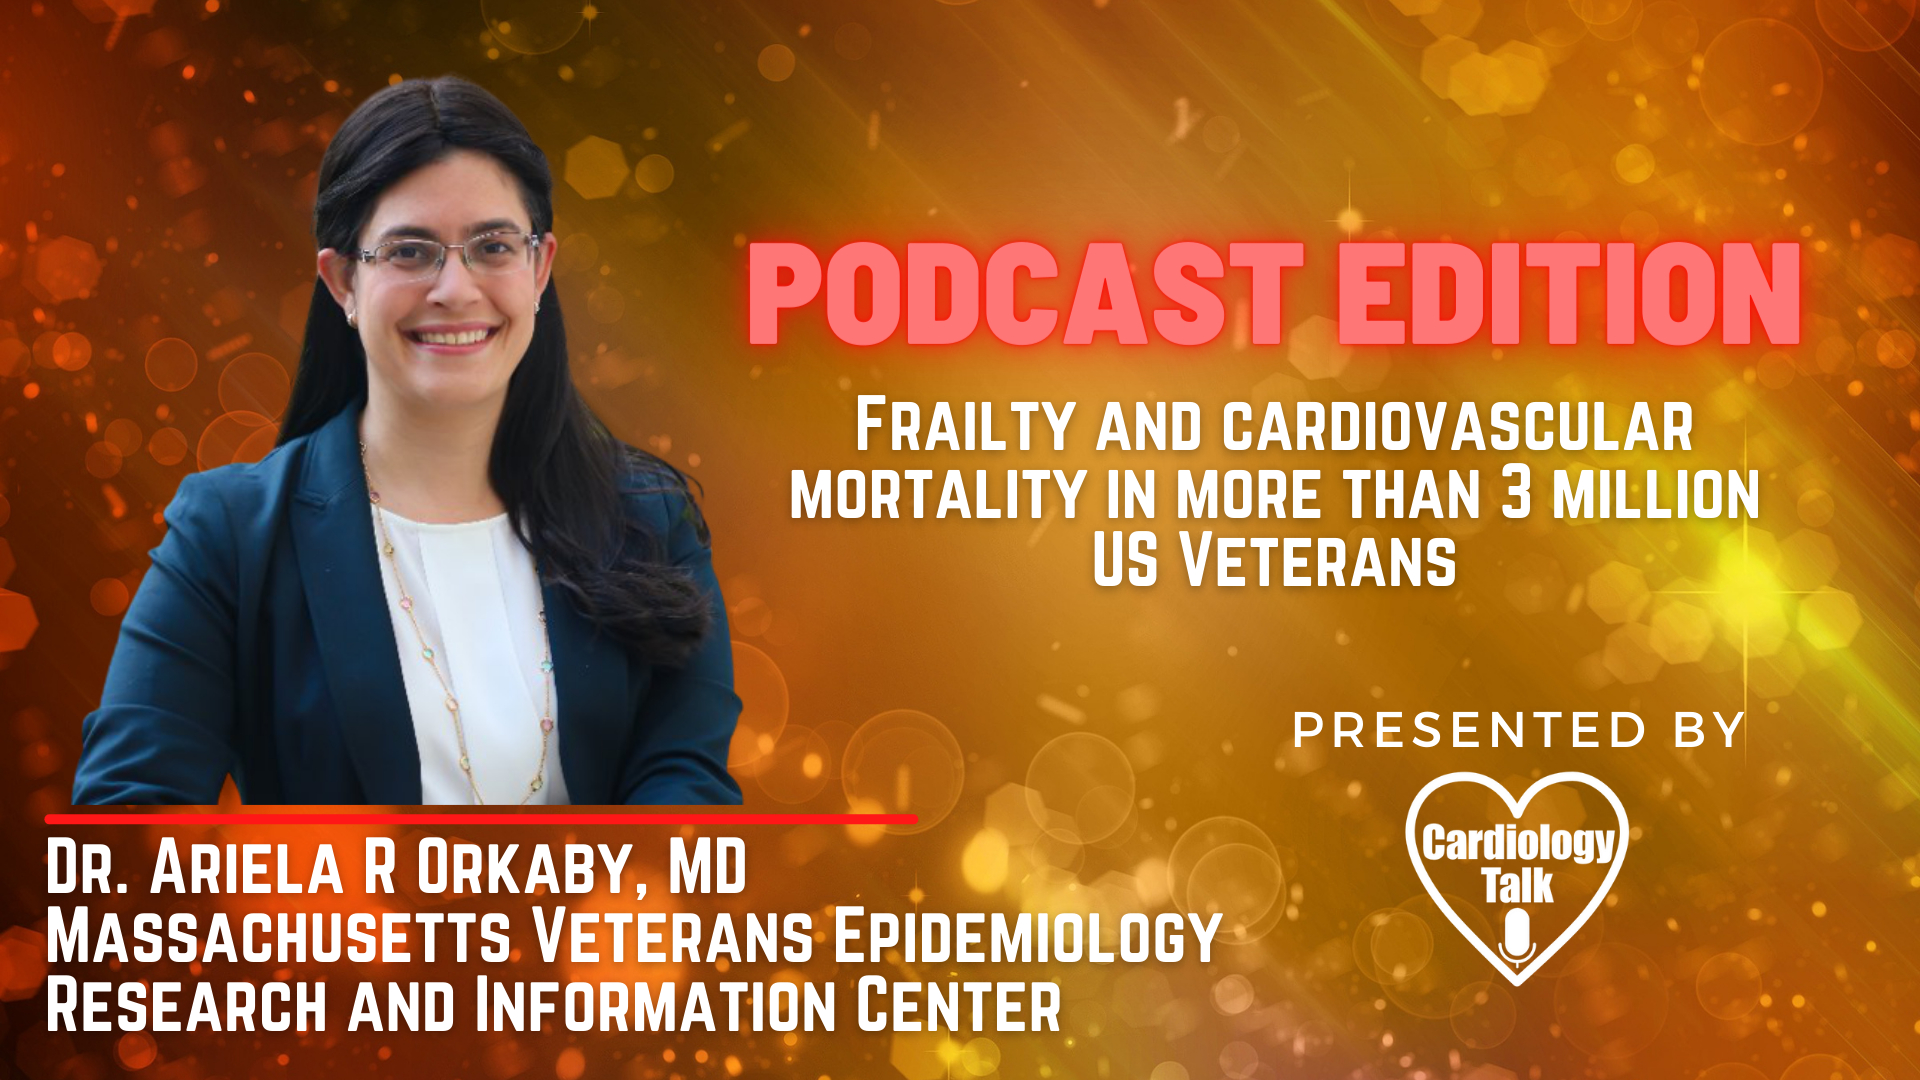 Podcast- Dr. Ariela R Orkaby, MD- Frailty and cardiovascular mortality in more than 3 million US Veterans #CardiovascularMortality #USVeteransHealth #EHJ #Cardiology